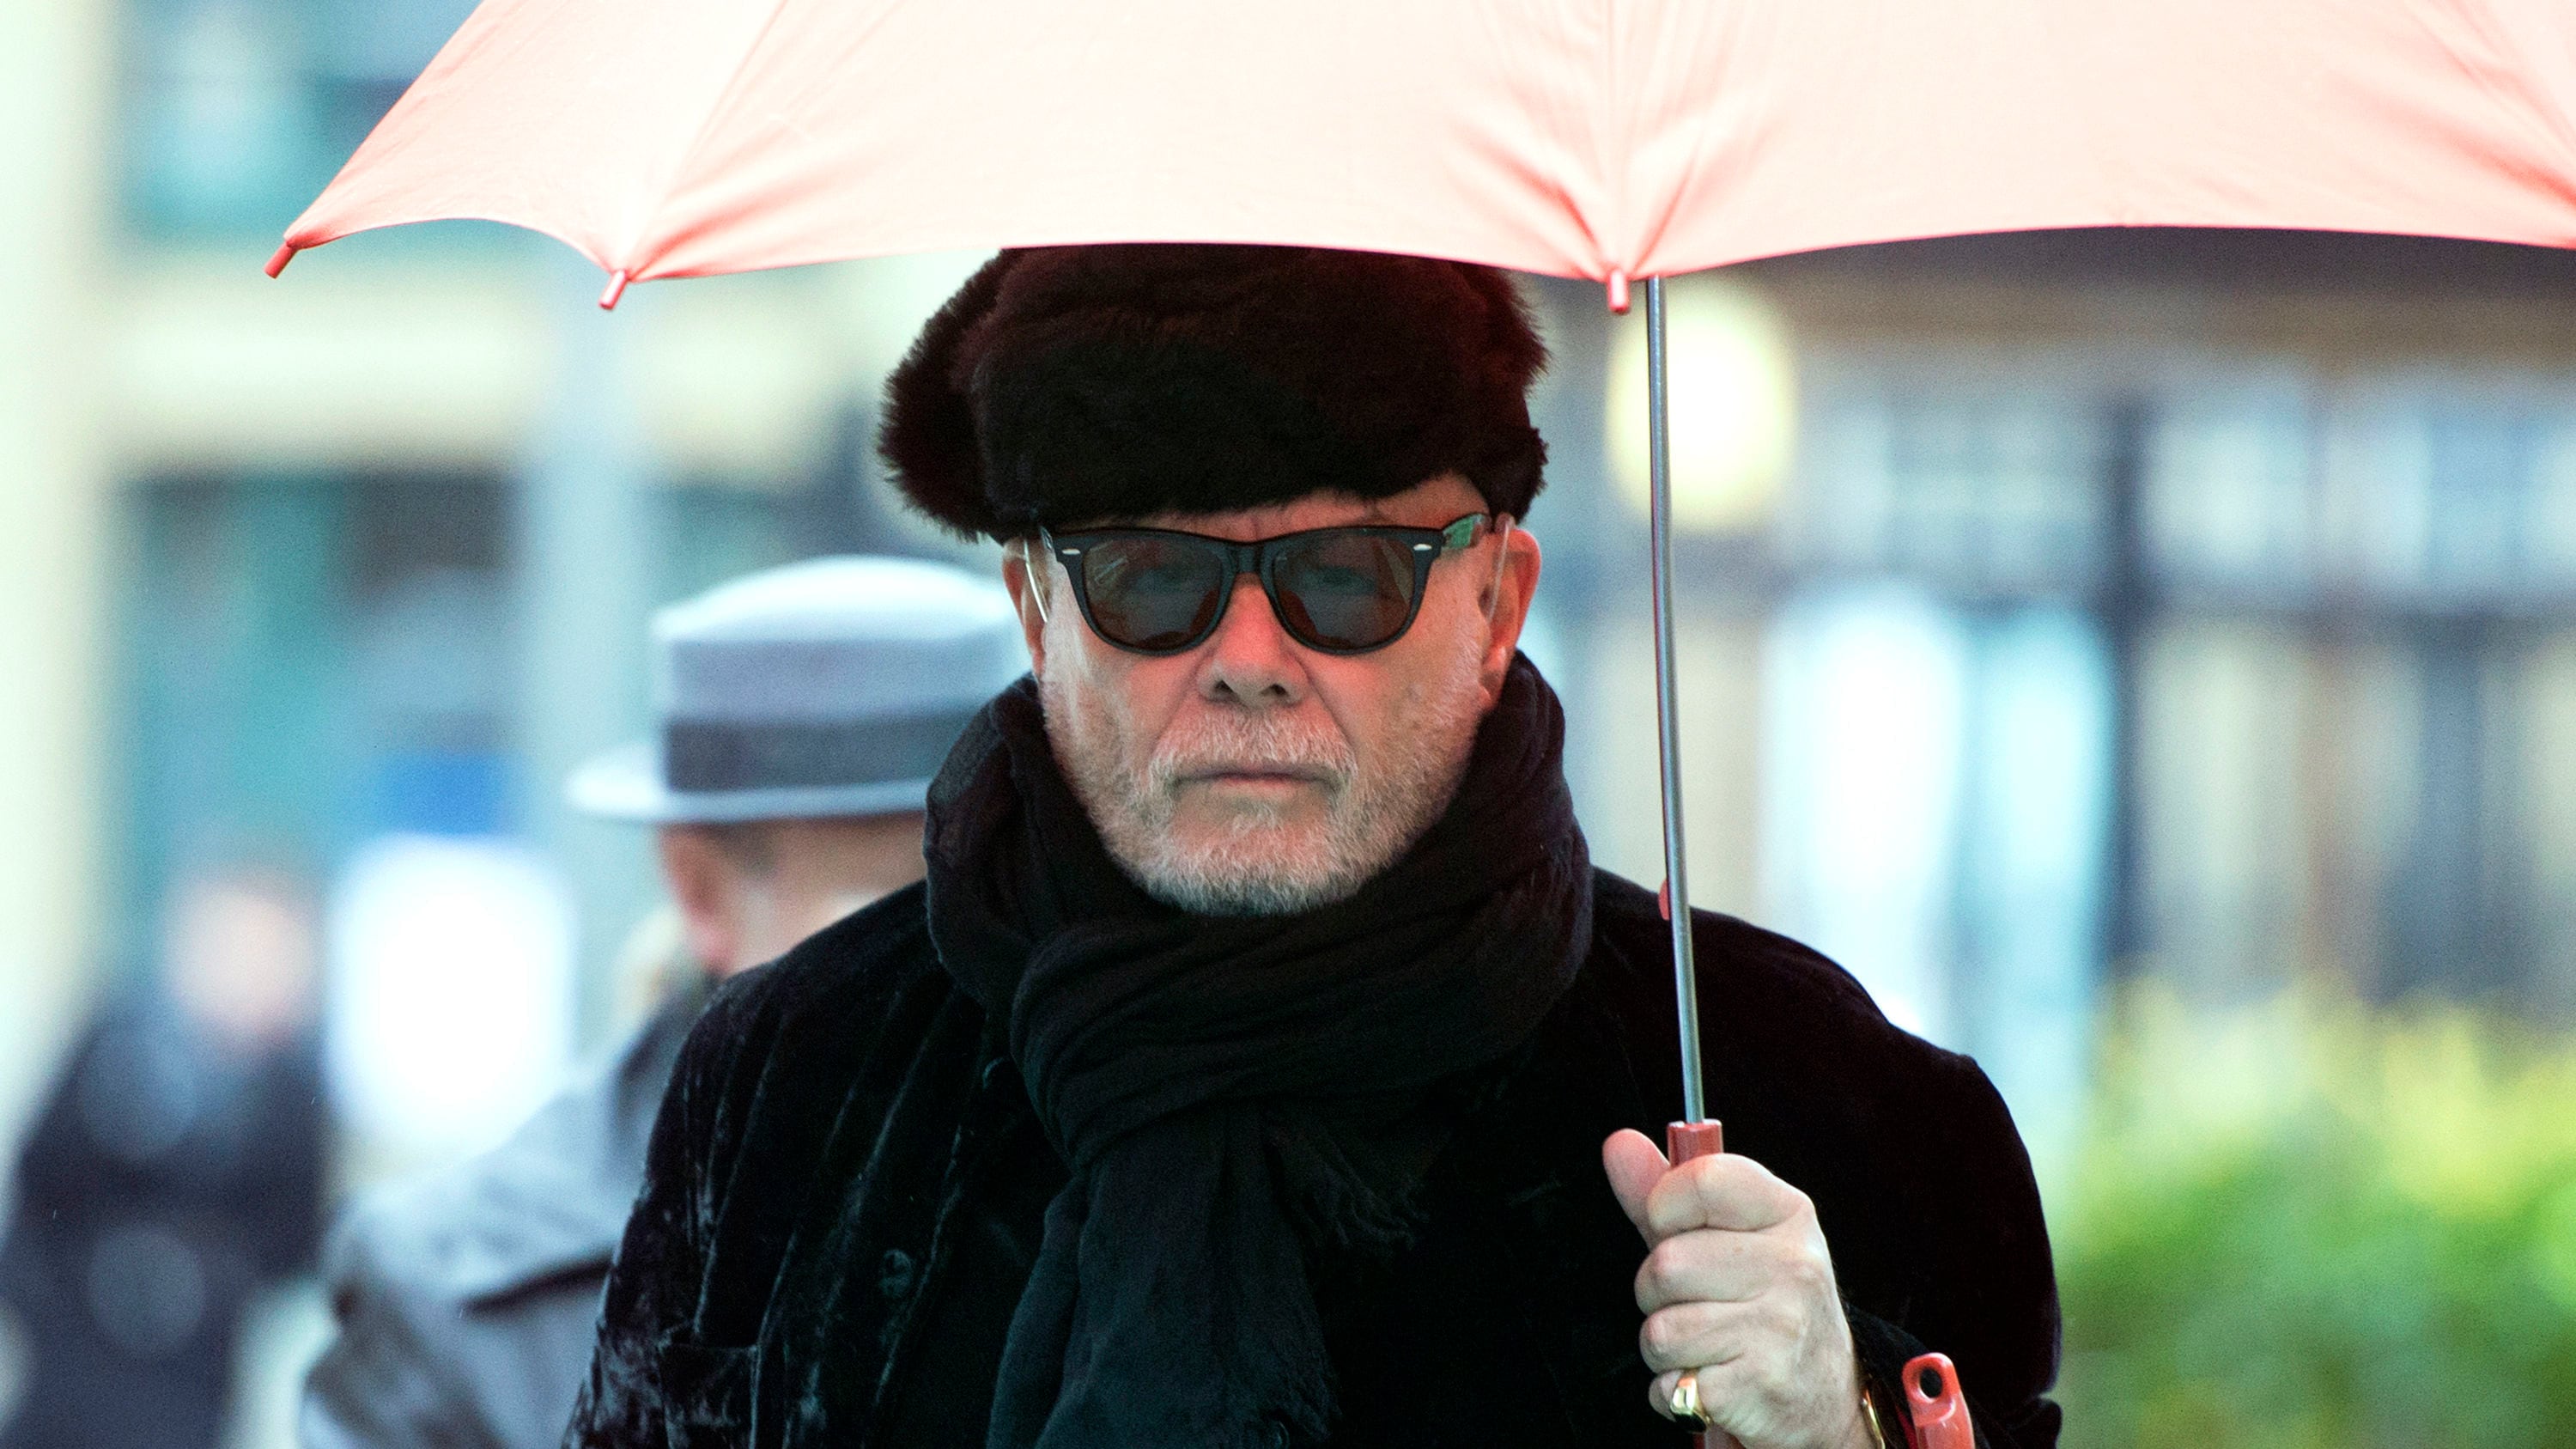 Former pop star Gary Glitter, real name Paul Gadd, previously faced a trial at Southwark Crown Court